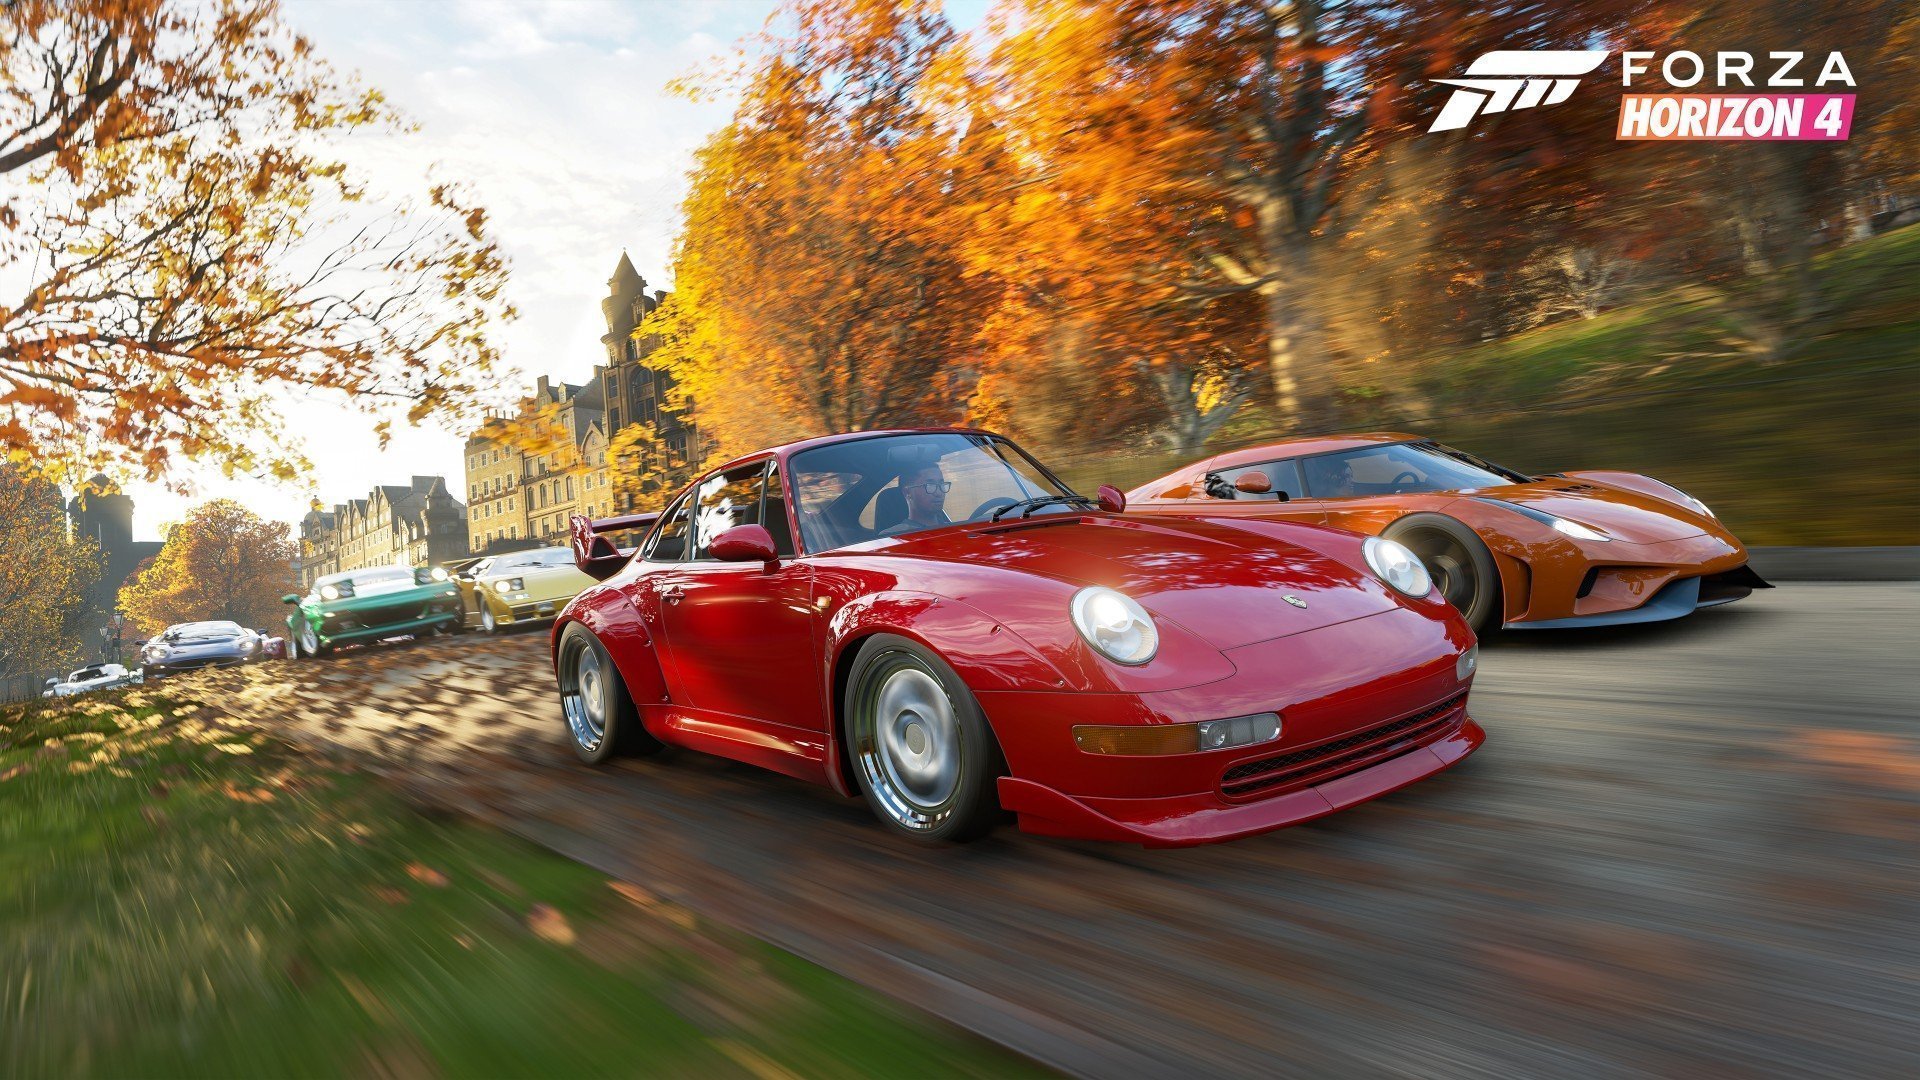 Forza Horizon 4 Demo is now available for free on Windows 10 and Xbox One Forza-Horizon-4_Autumn-Drive-1.jpg